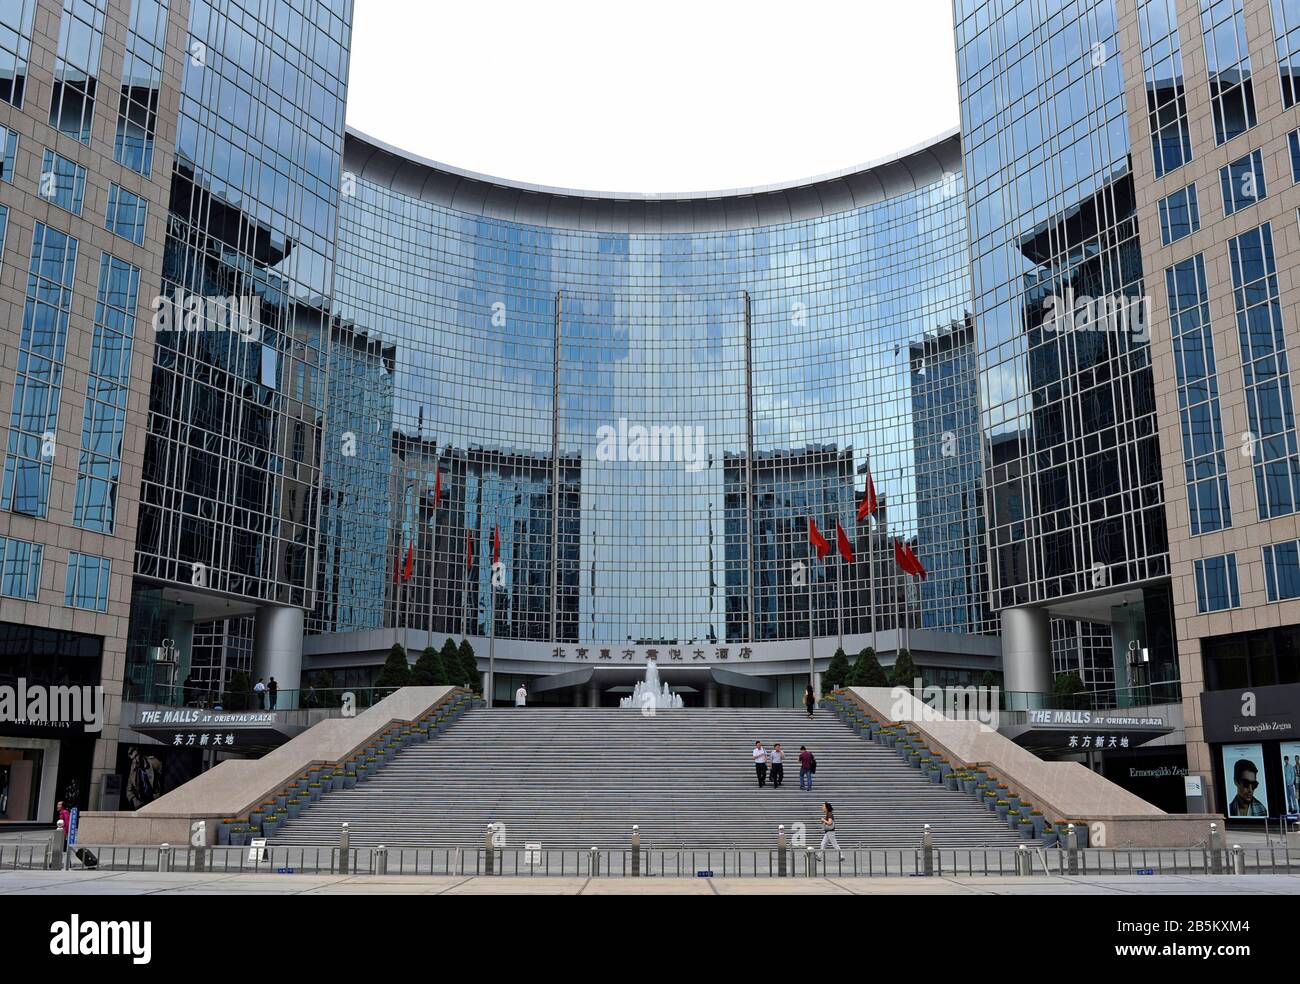 Oriental Plaza entrance, Chang'an avenue, central Beijing, China Stock Photo